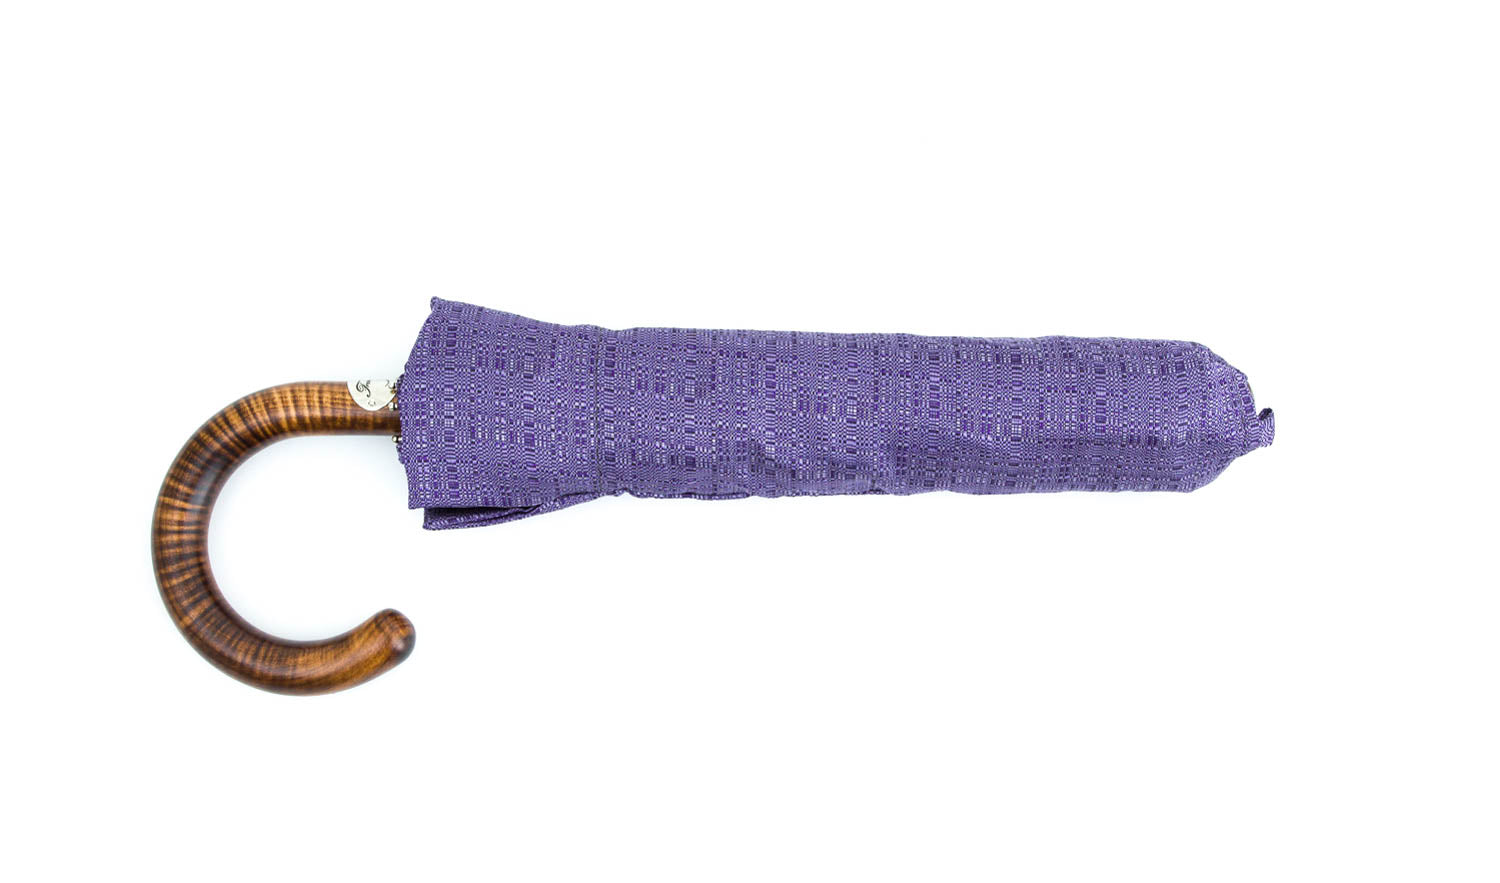 An Imperial Purple Travel Umbrella with Maple Handle by KirbyAllison.com.